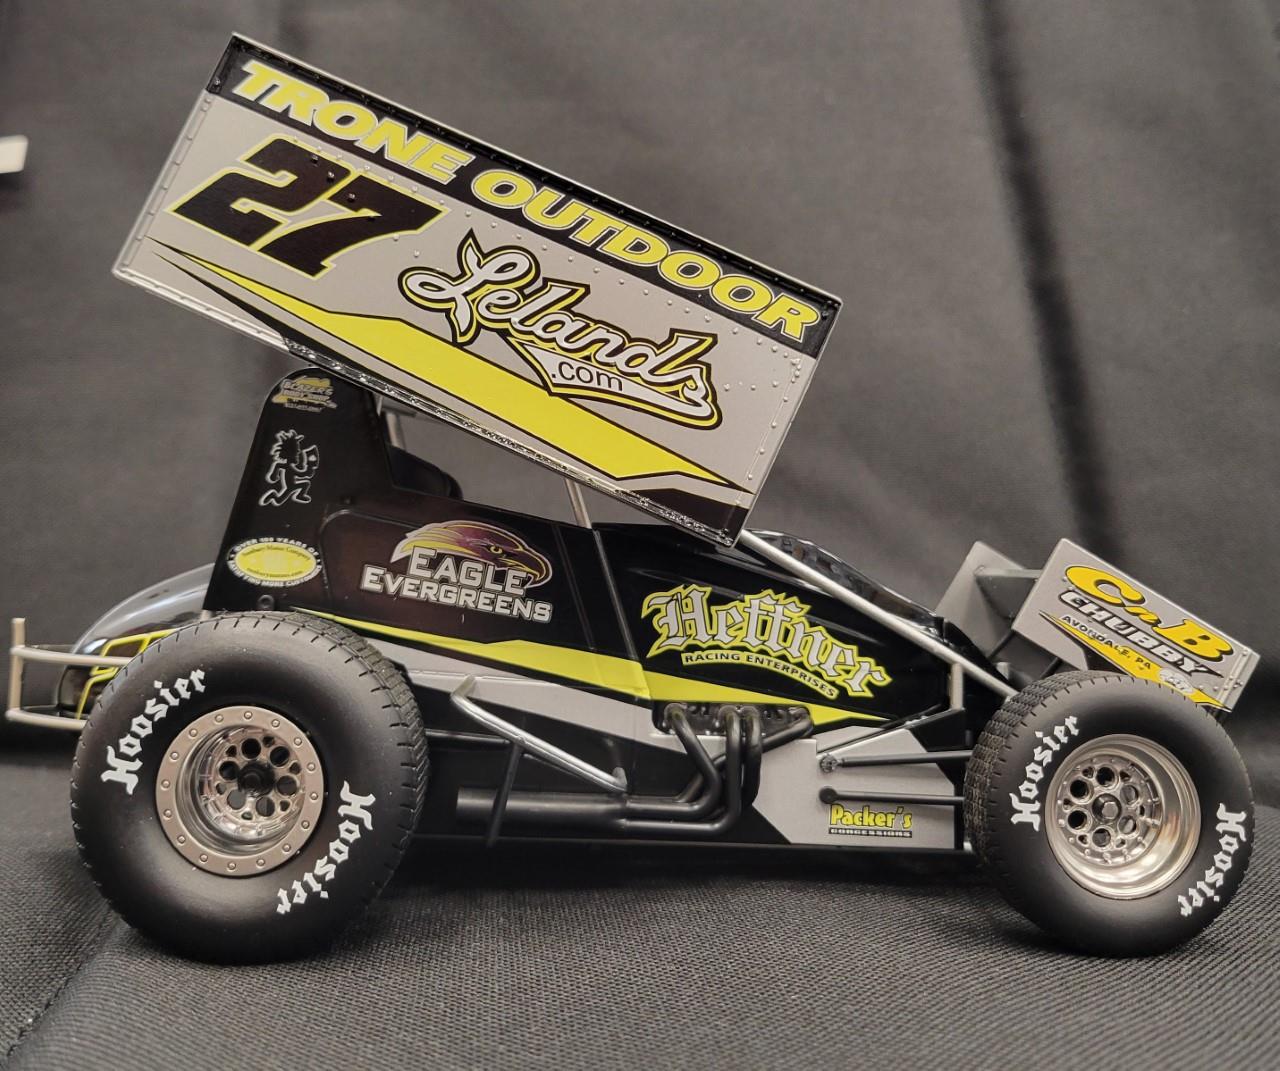 Order Your National Sprint Car Hall of Fame & Museum “Members Only” Greg Hodnett #27 Die-cast Today!